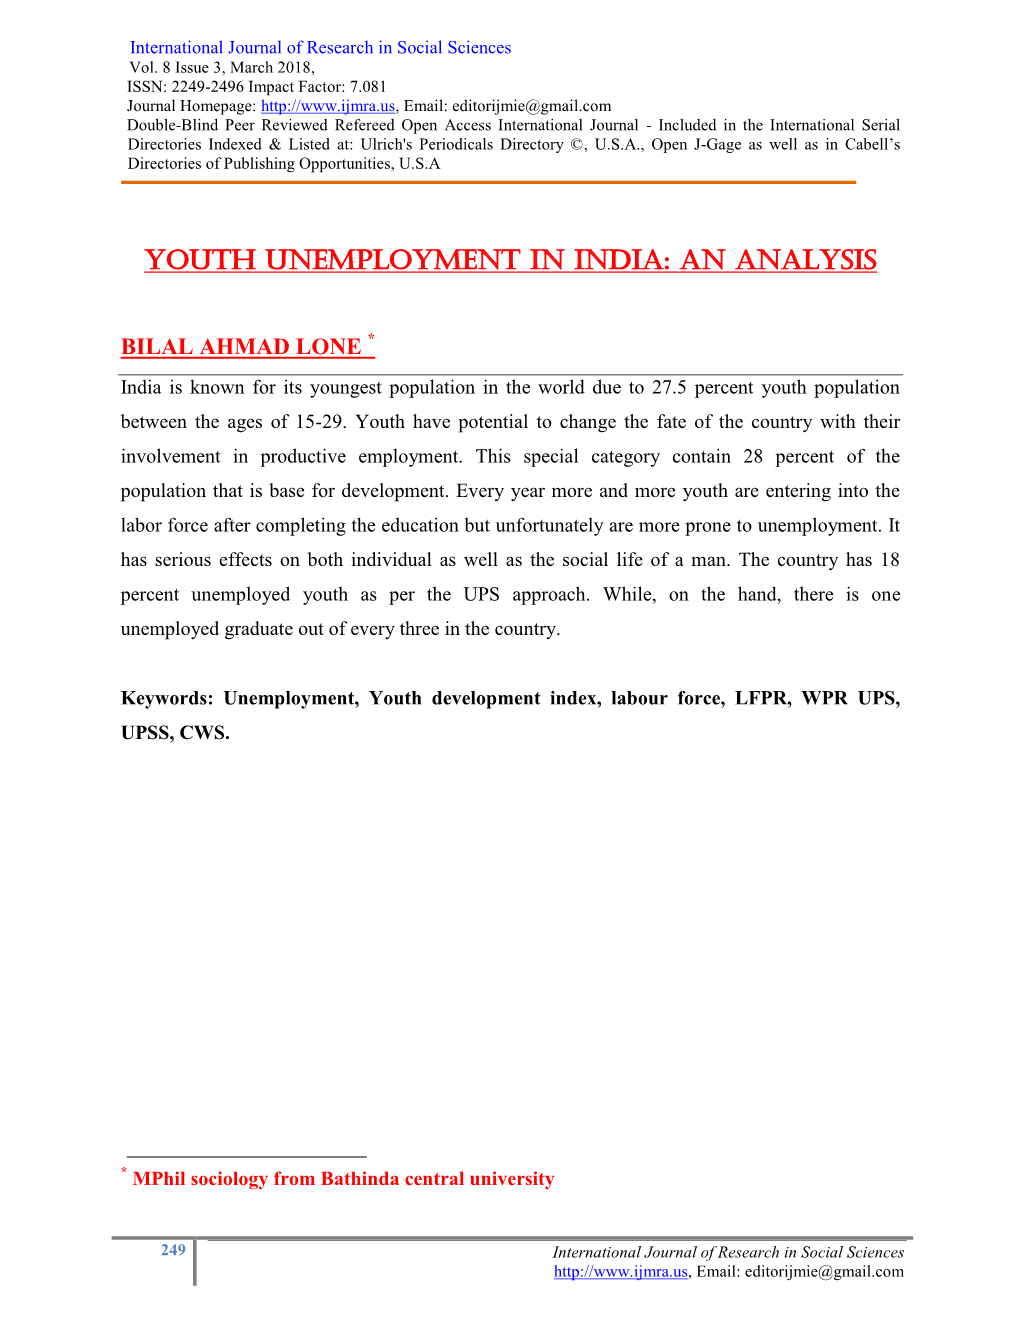 case study on youth unemployment in india